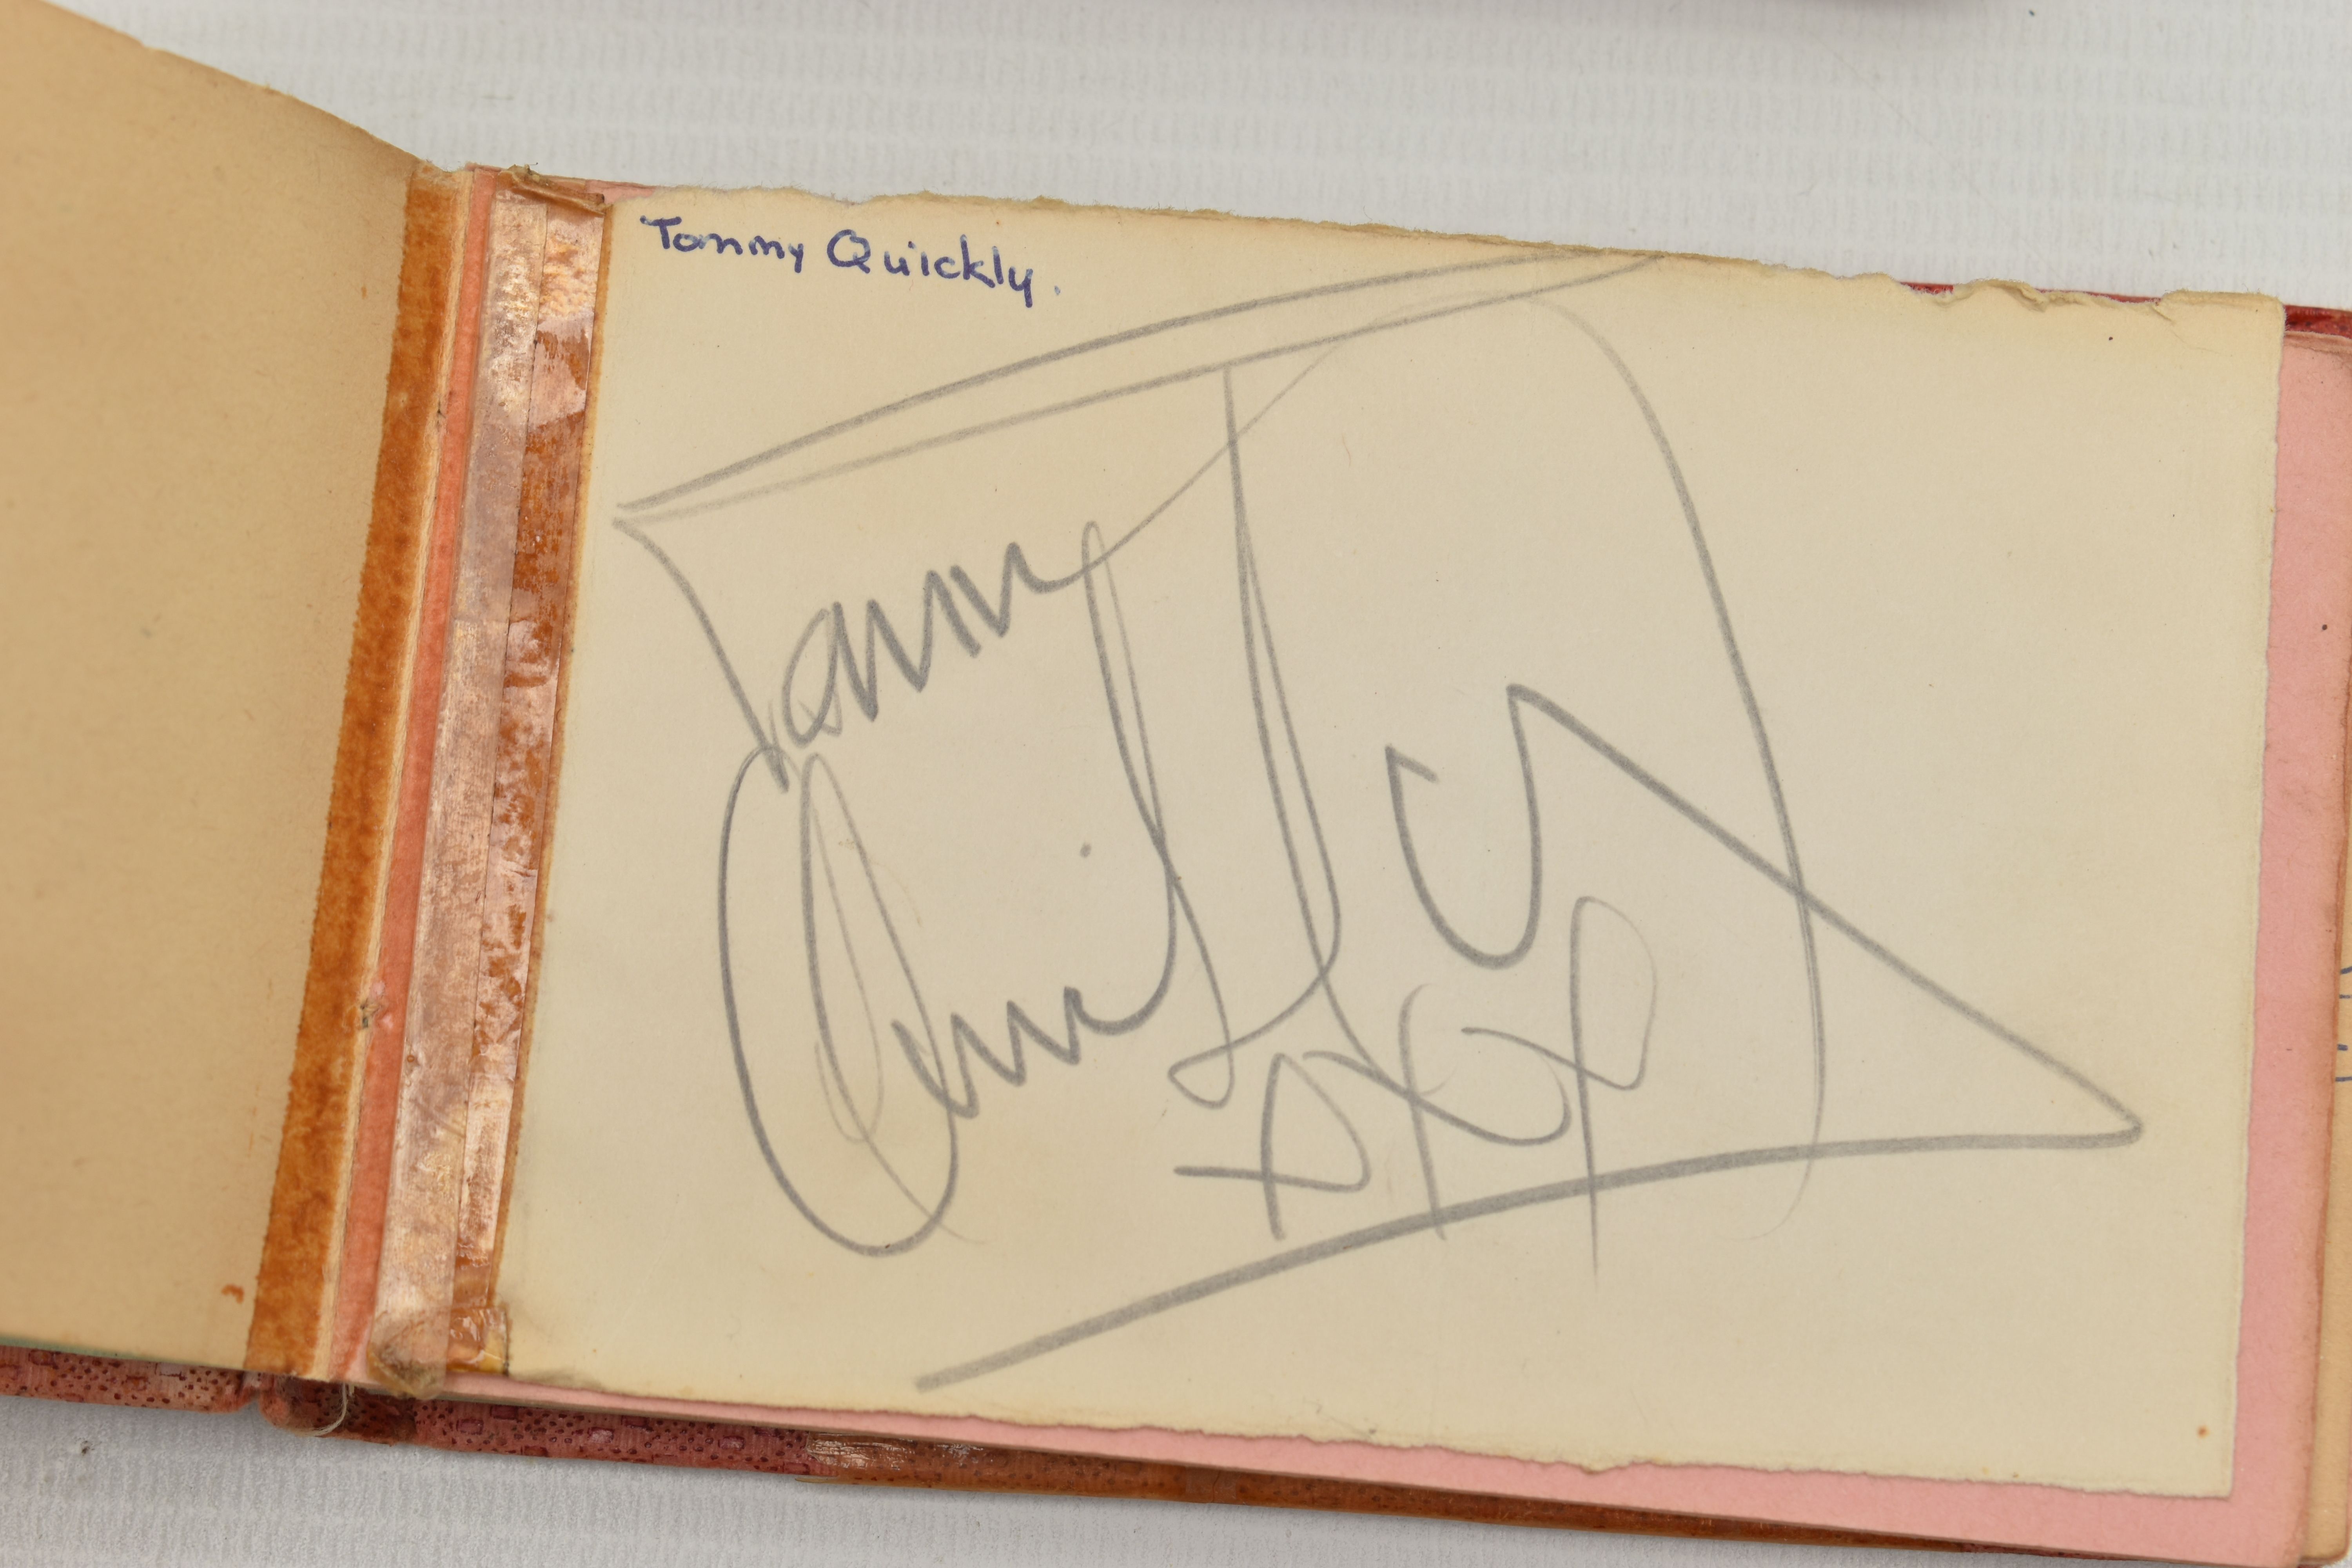 THE BEATLES AUTOGRAPHS, two autograph albums and two photographs, the Woburn Abbey autograph book is - Image 4 of 22